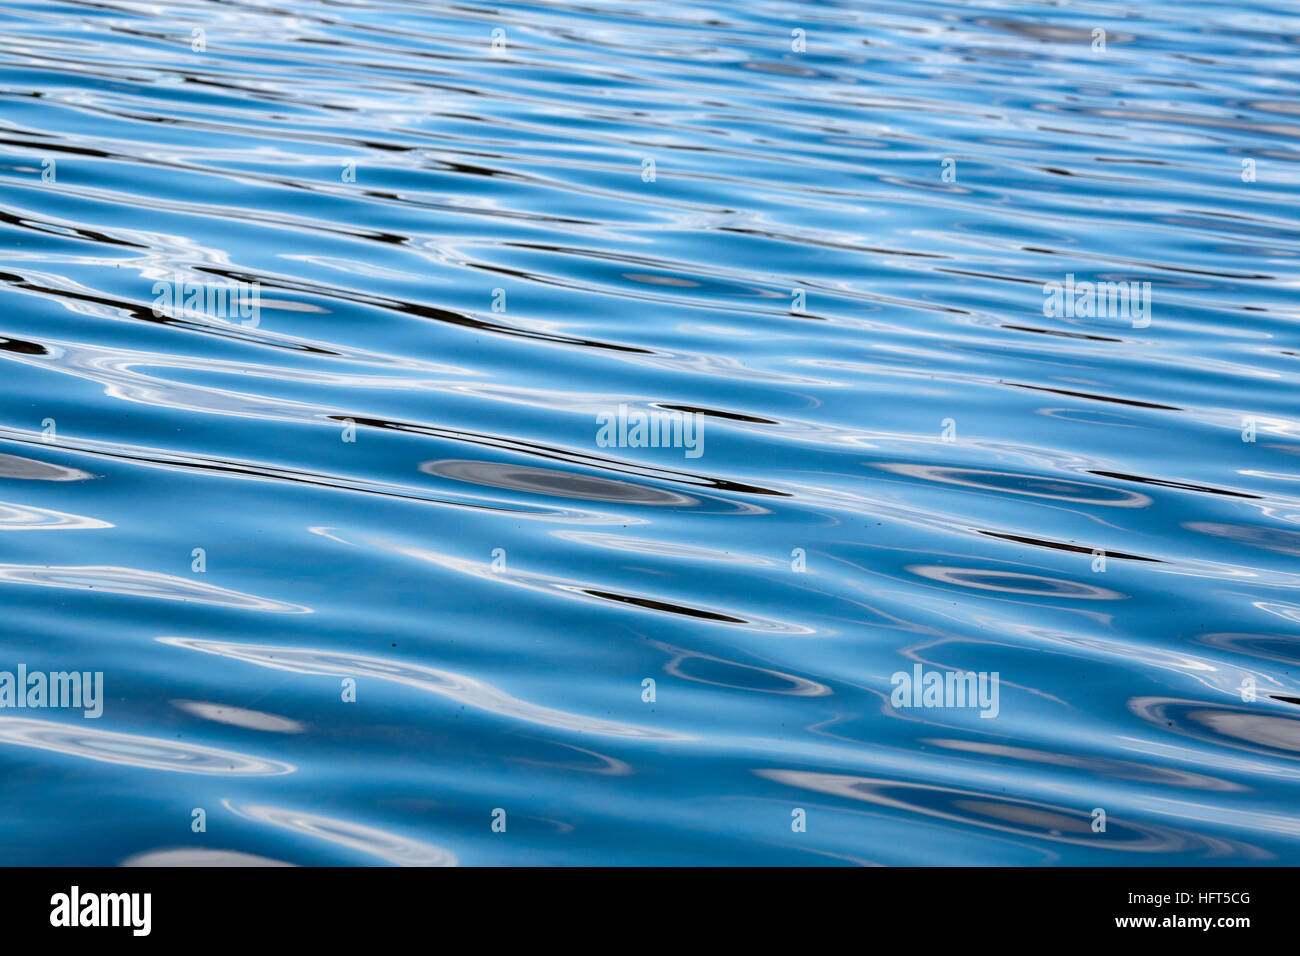 reflections on water surface Stock Photo